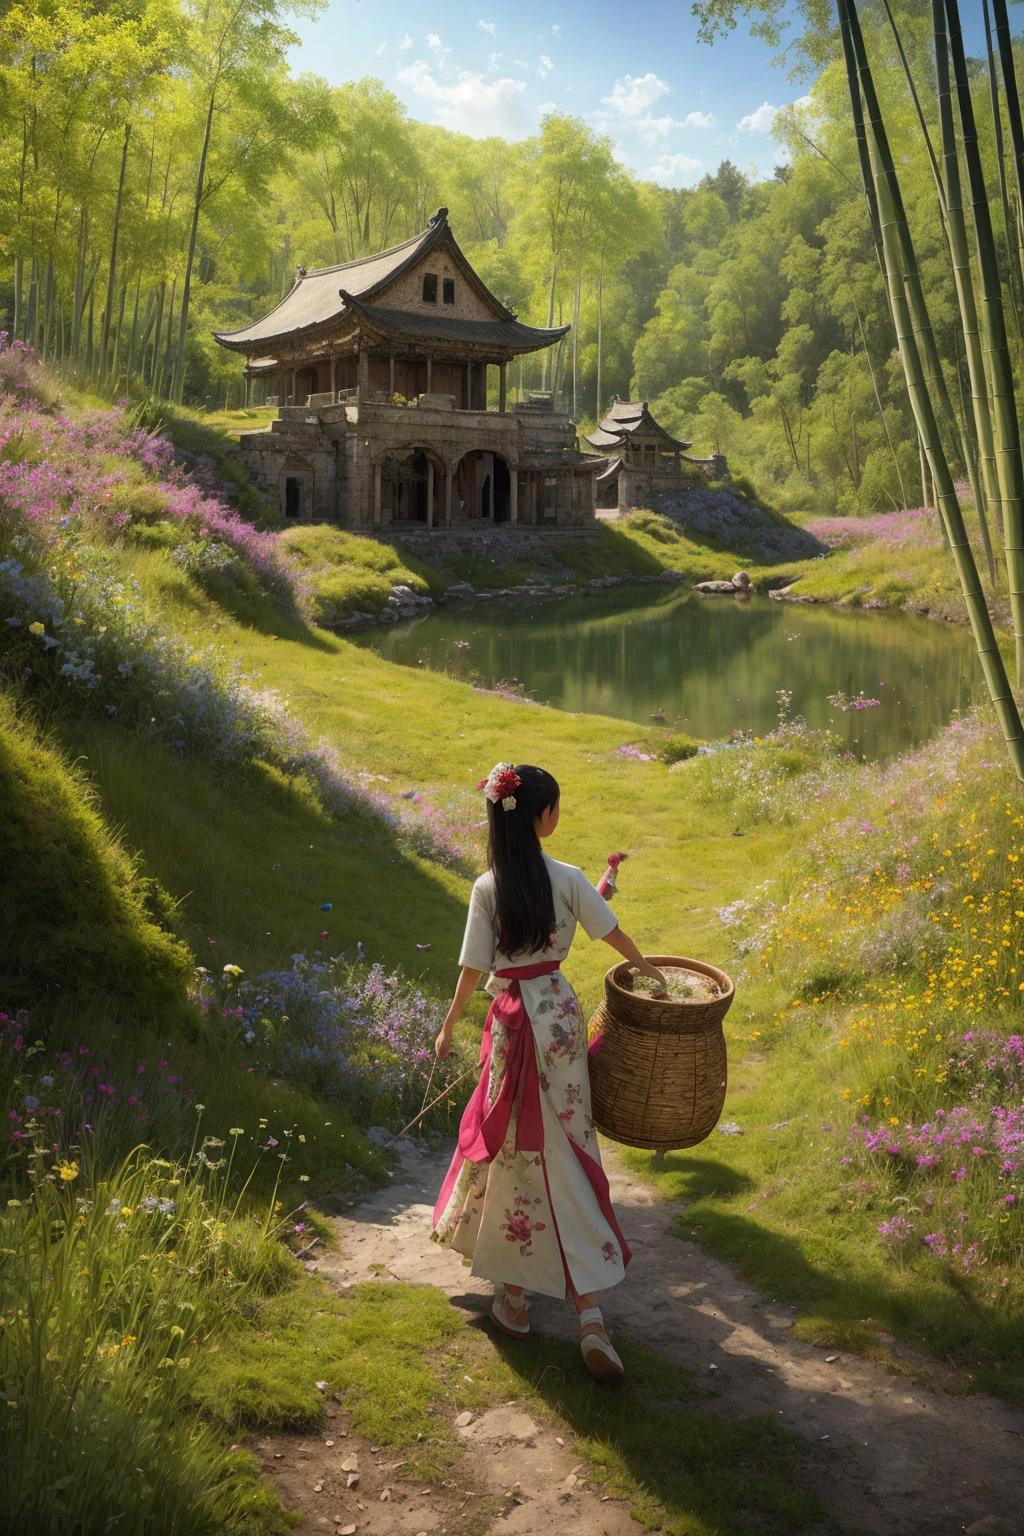 In a still image, a tranquil lake houses ancient ruins at its center, covered in wildflowers, grasses, moss, and fungi. Amidst this captivating scene, a young Chinese girl in traditional attire gathers mushrooms, her bamboo basket on her back, as butterflies flit around her, creating a sense of harmony and mystery.
hdr, (photorealism, masterpiece quality, best quality),  pureerosface_v1